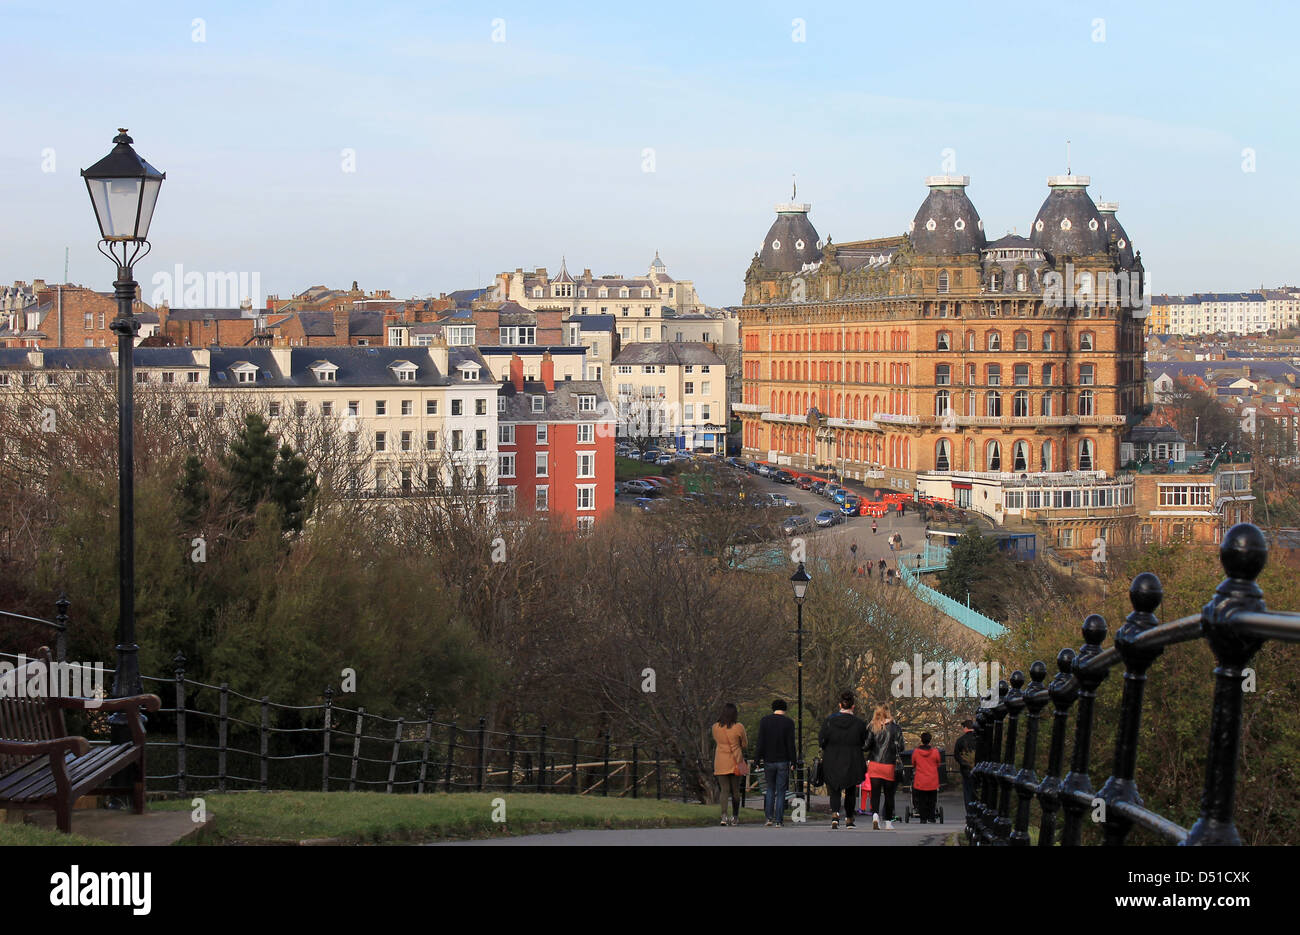 Scarborough Town, England, February 17, 2013: Photograph of old town and Grand Hotel viewed from South Cliff Esplanade, Stock Photo